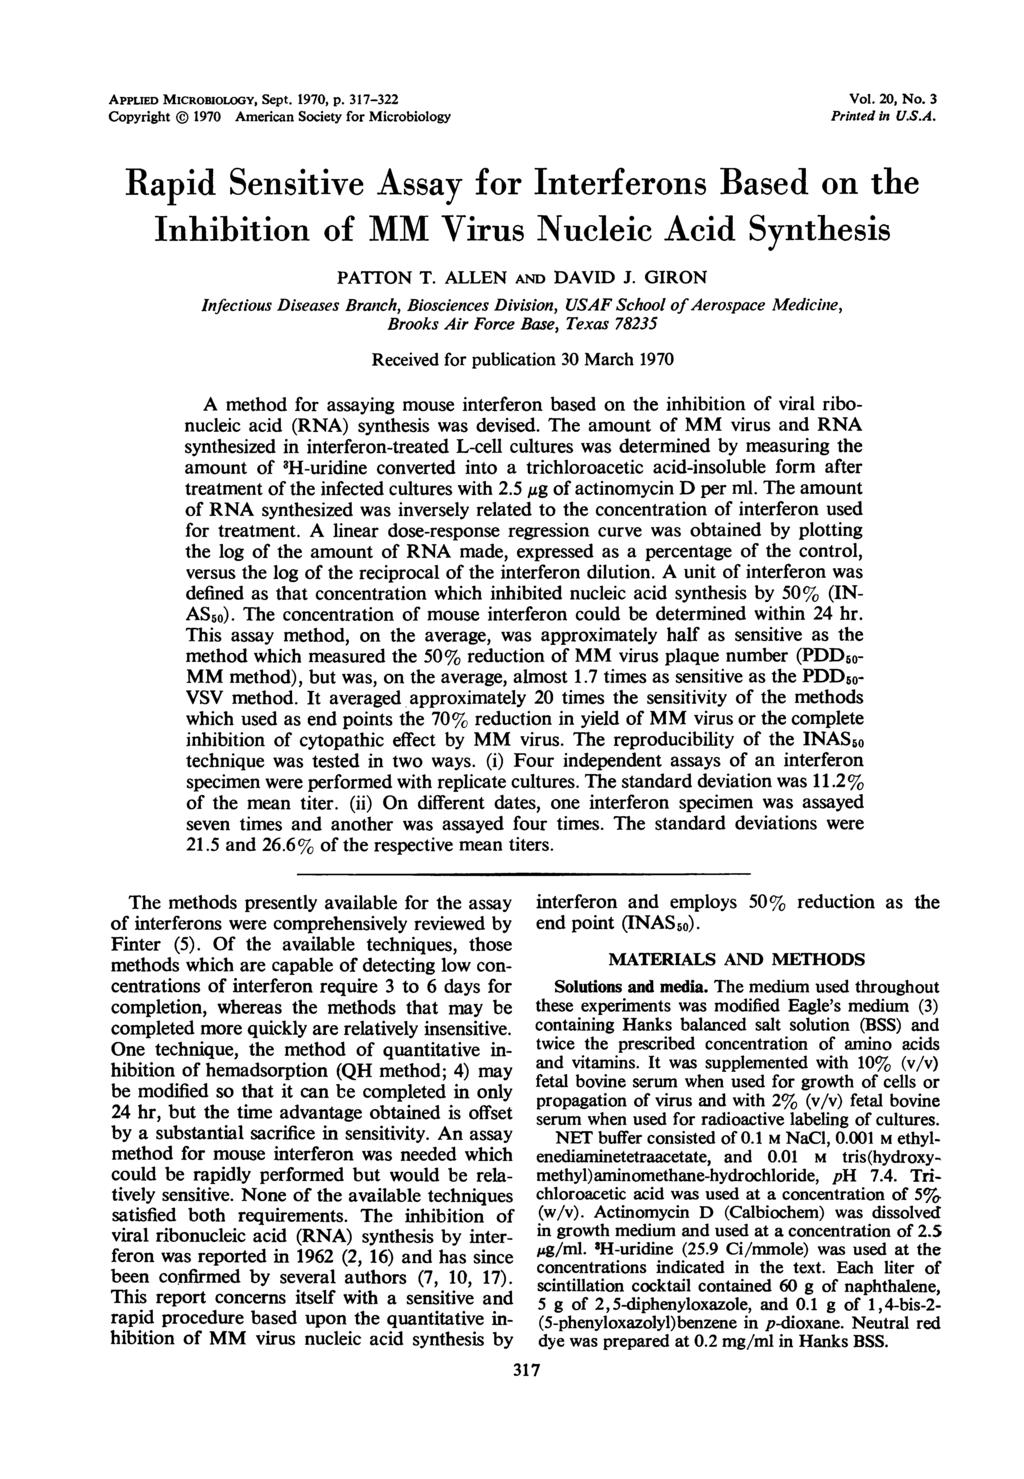 APPLIED MICROBIOLOGY, Sept. 1970, p. 317-322 Copyright ( 1970 American Society for Microbiology Vol. 20, No. 3 Printed in U.S.A. Rapid Sensitive Assay for Interferons Based on the Inhibition of MM Virus Nucleic Acid Synthesis PATTON T.